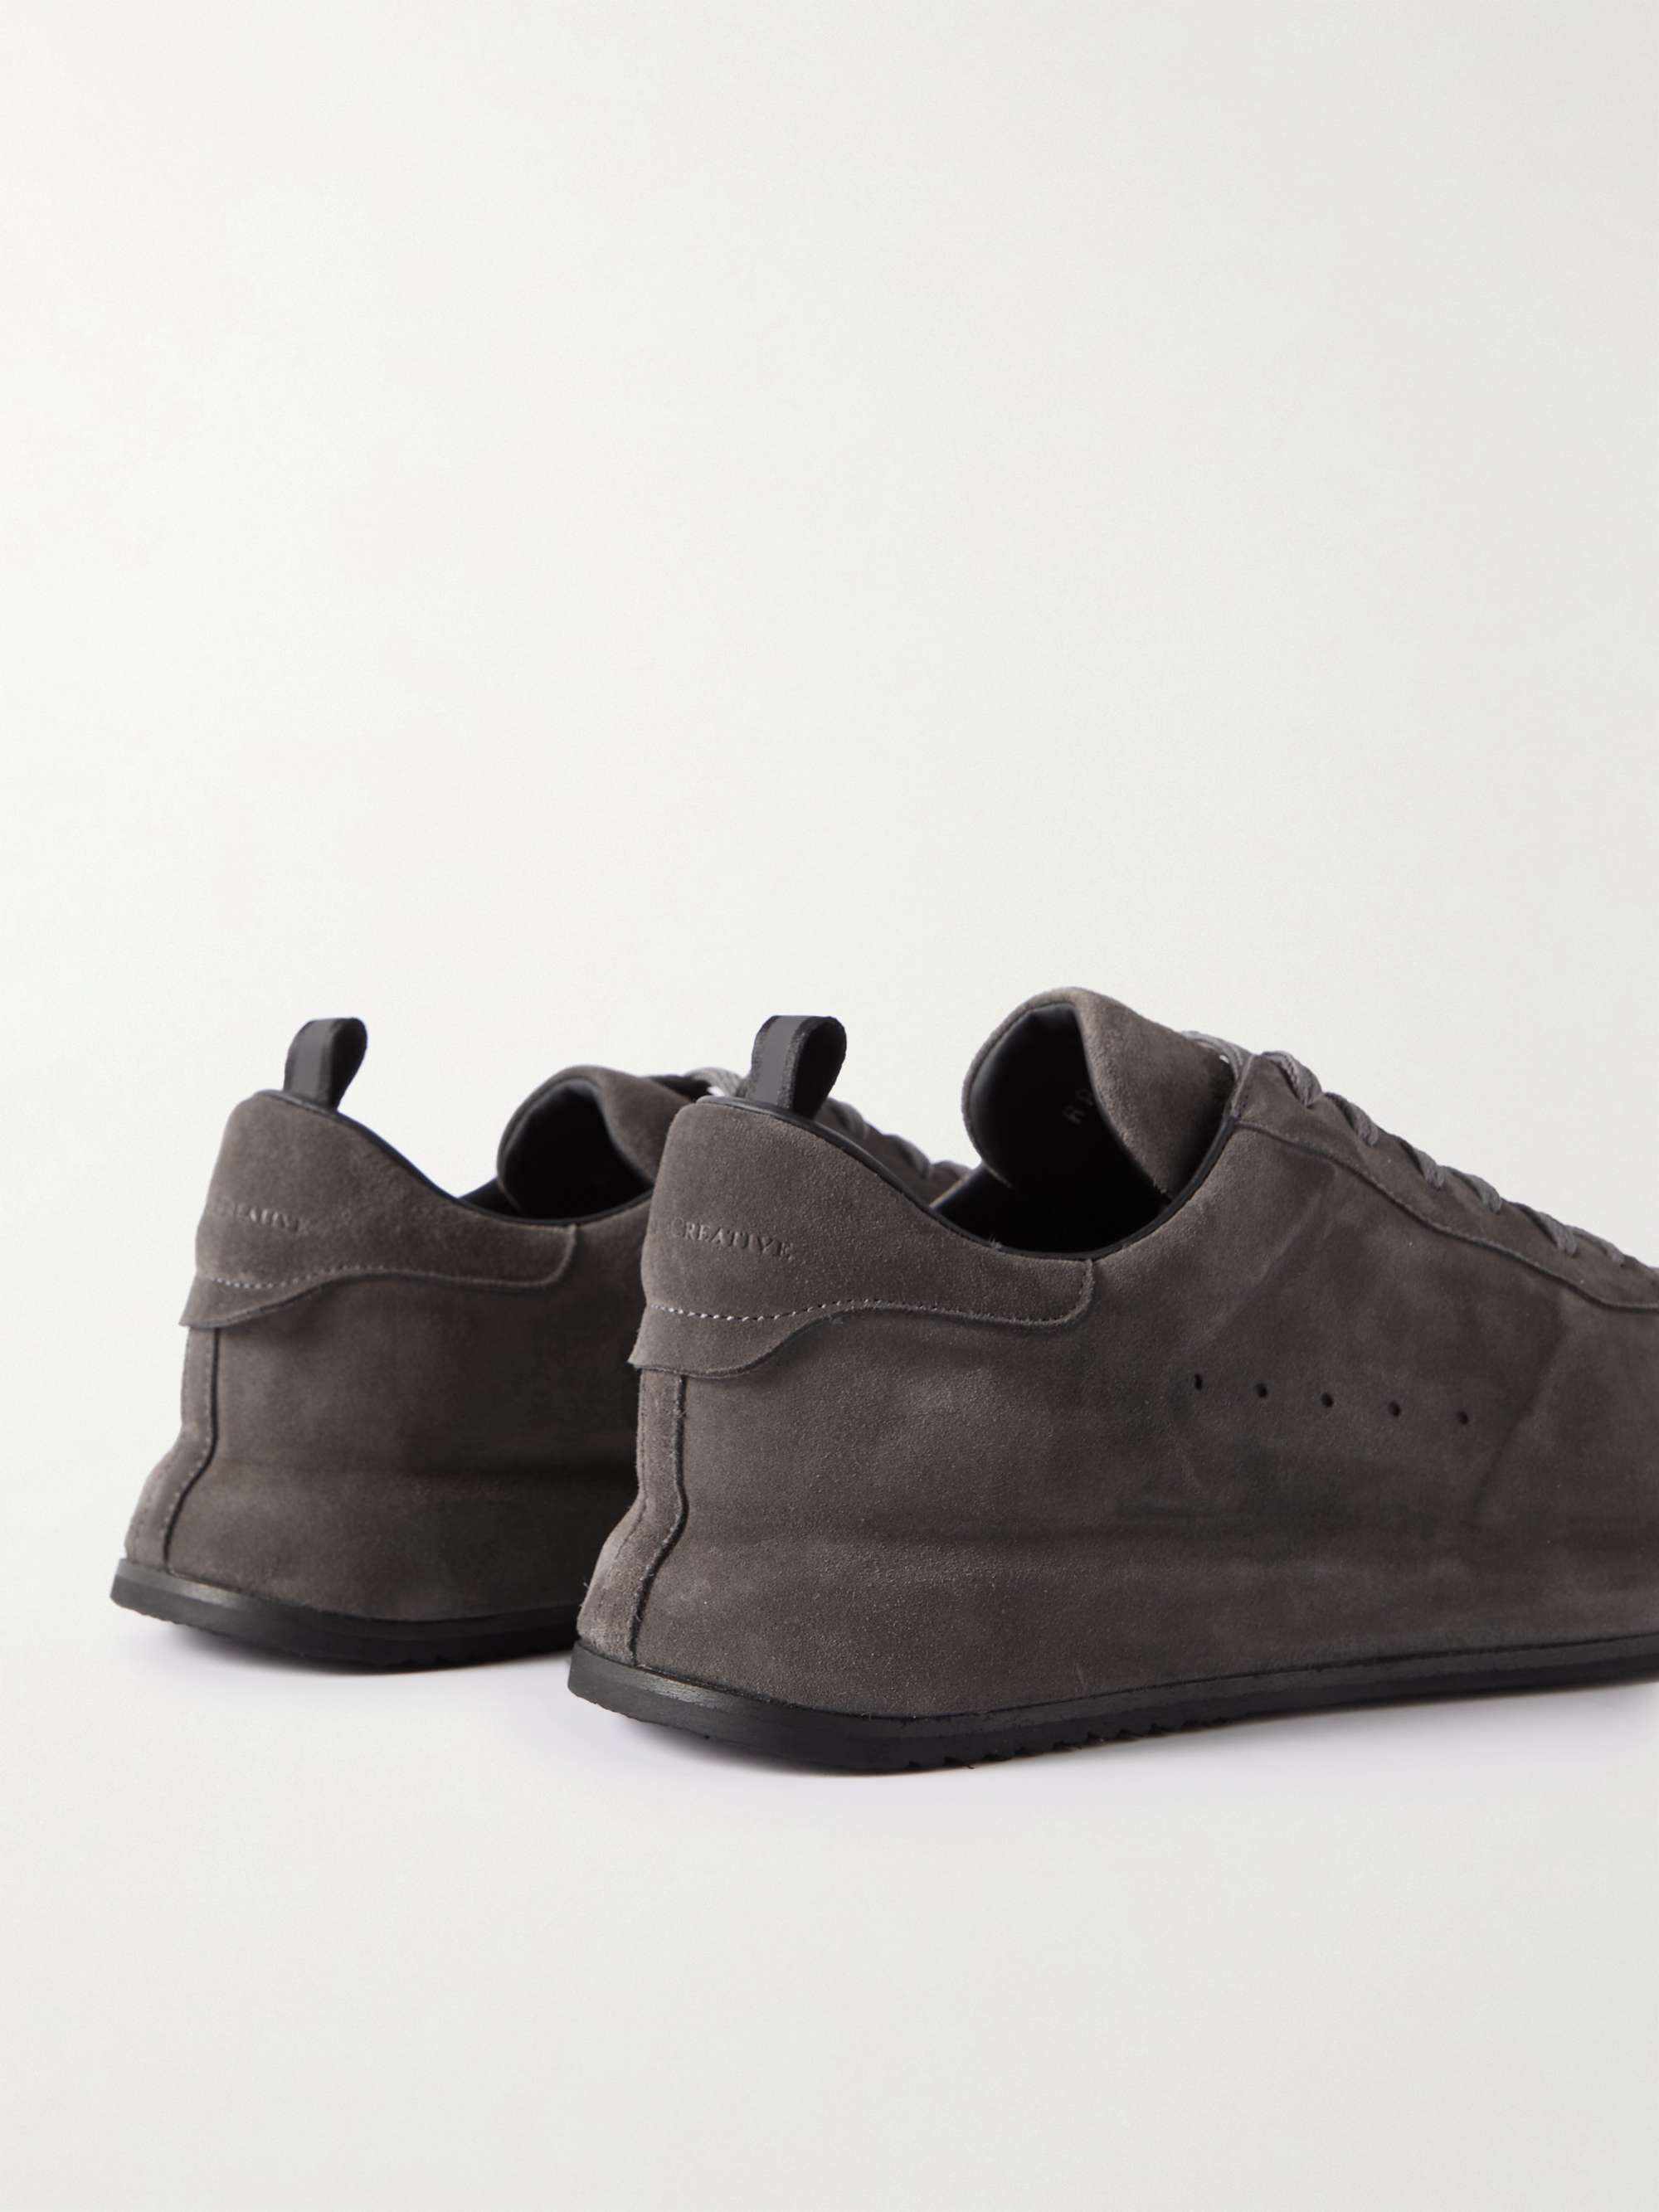 OFFICINE CREATIVE Race Lux Leather Sneakers